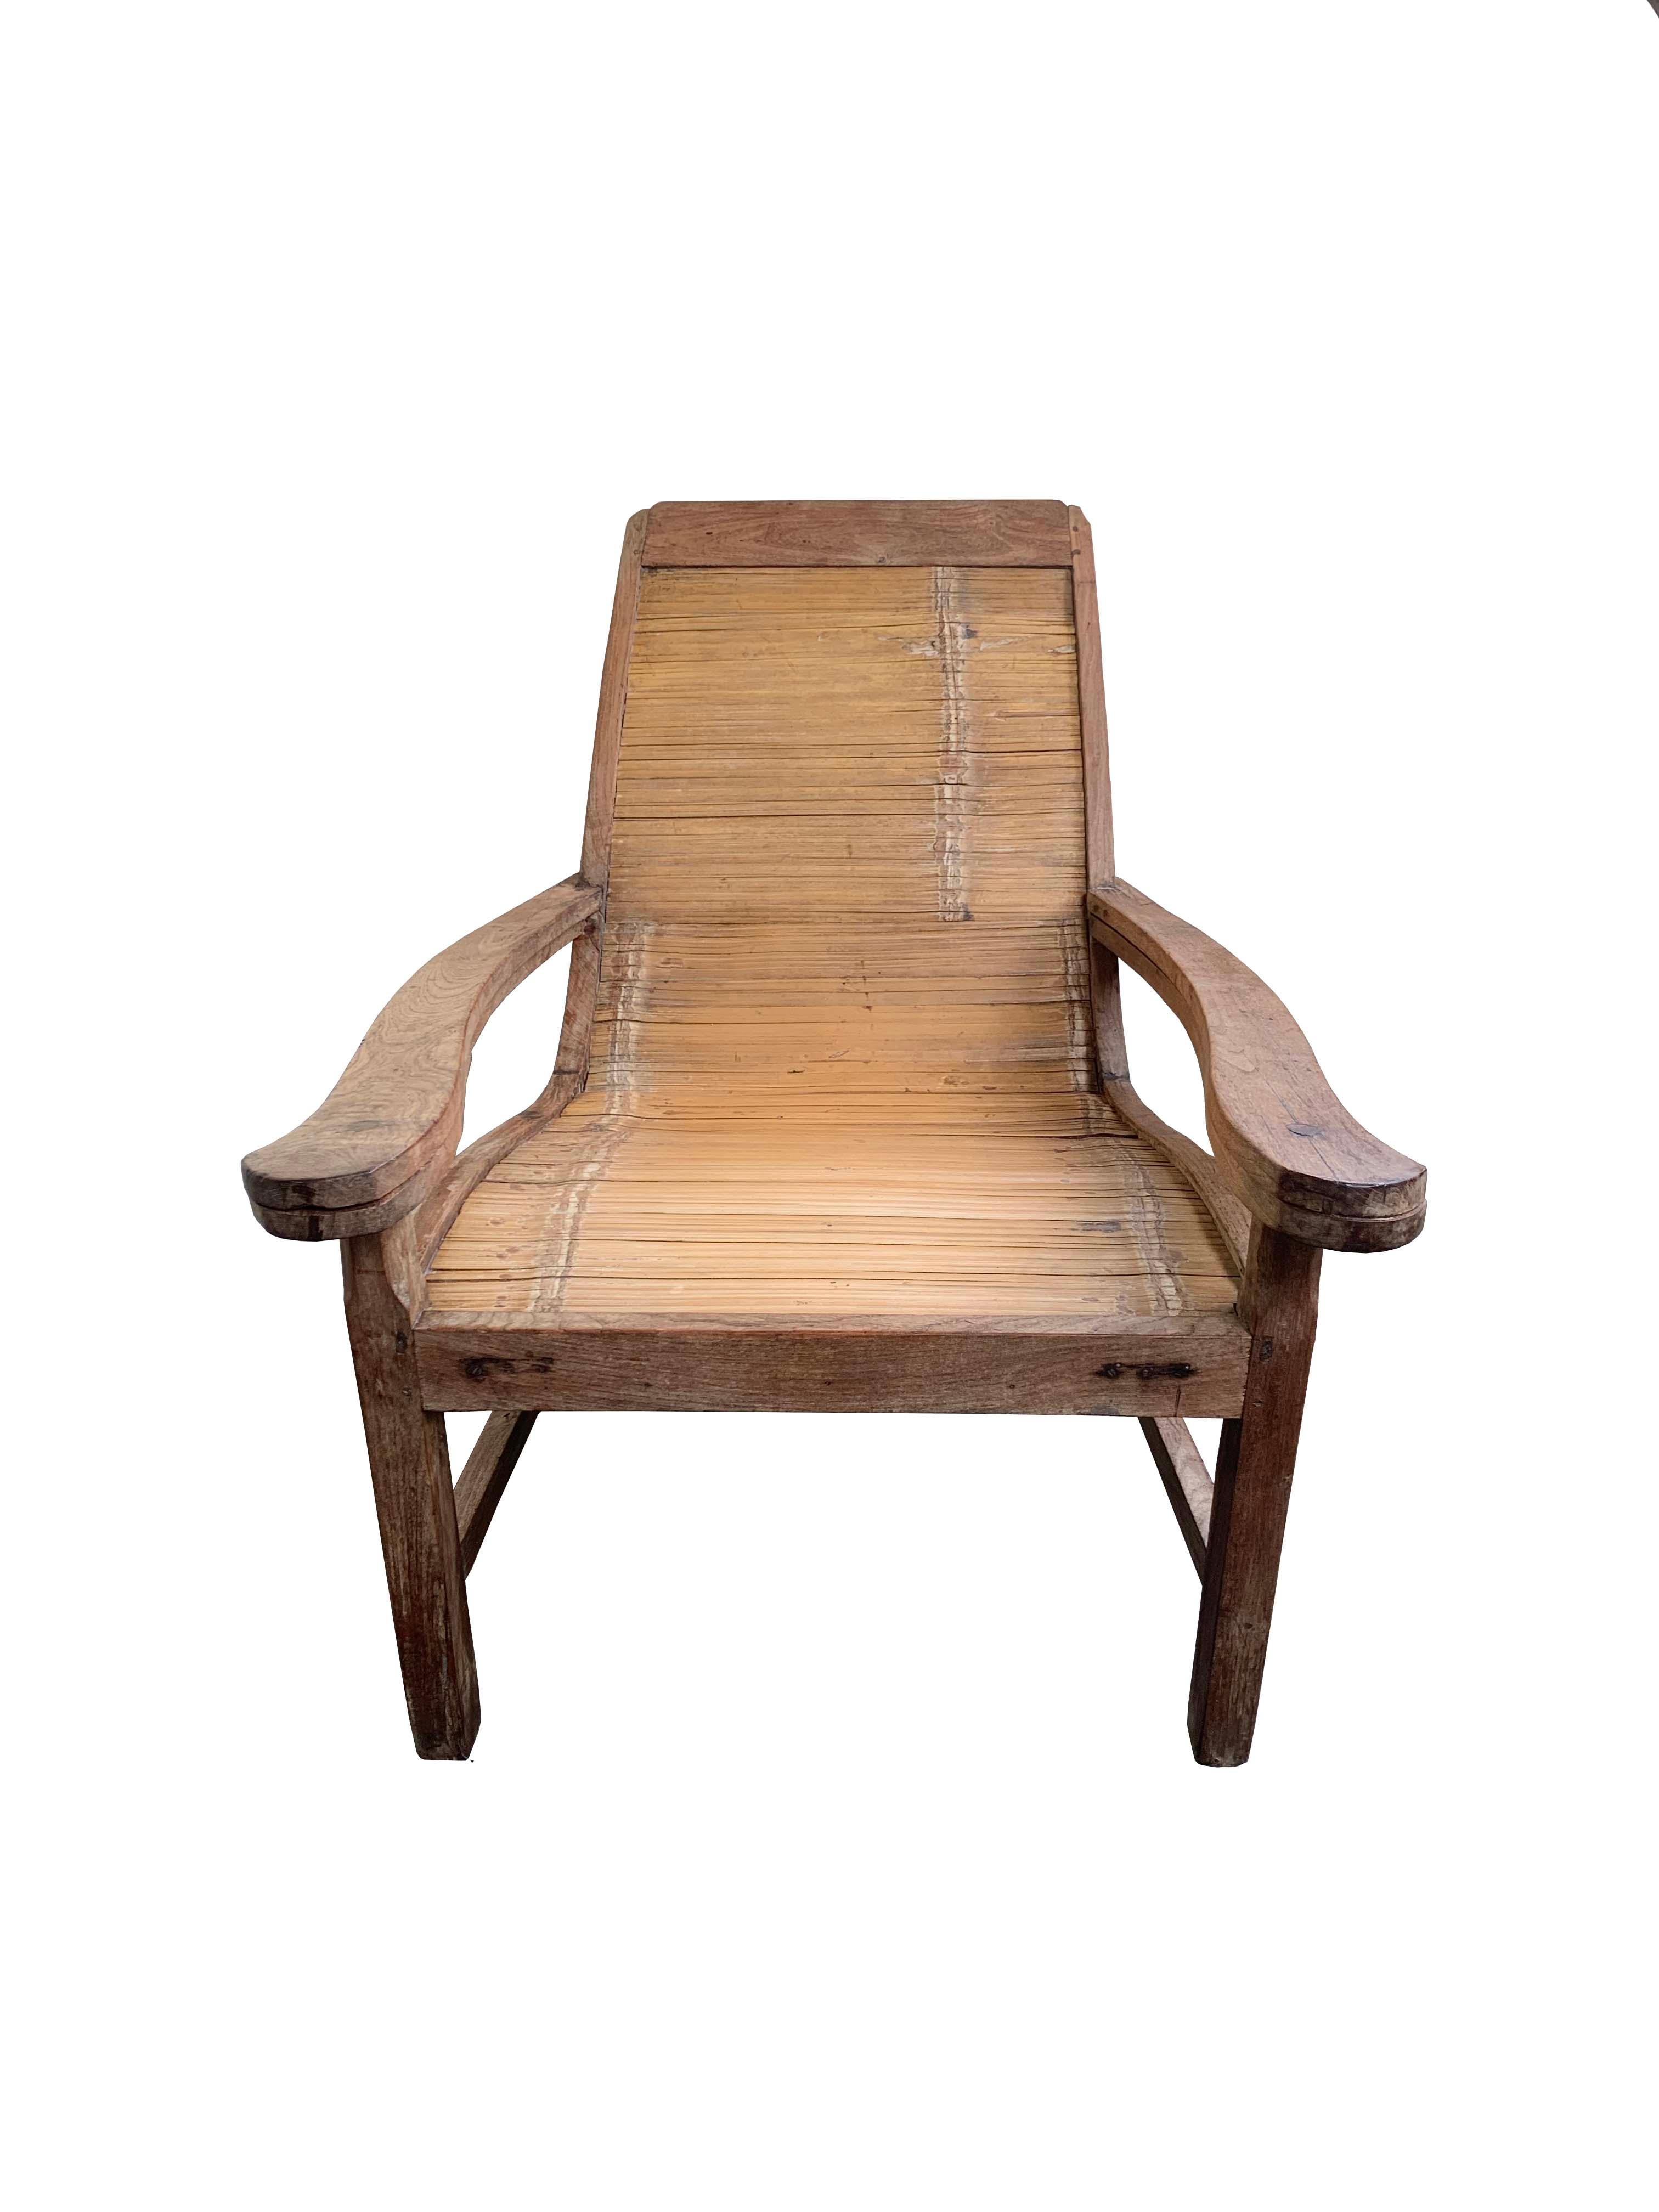 Dutch Colonial Colonial Solid Teak & Bamboo Plantation Chair with Leg Rests, Java, Indonesia